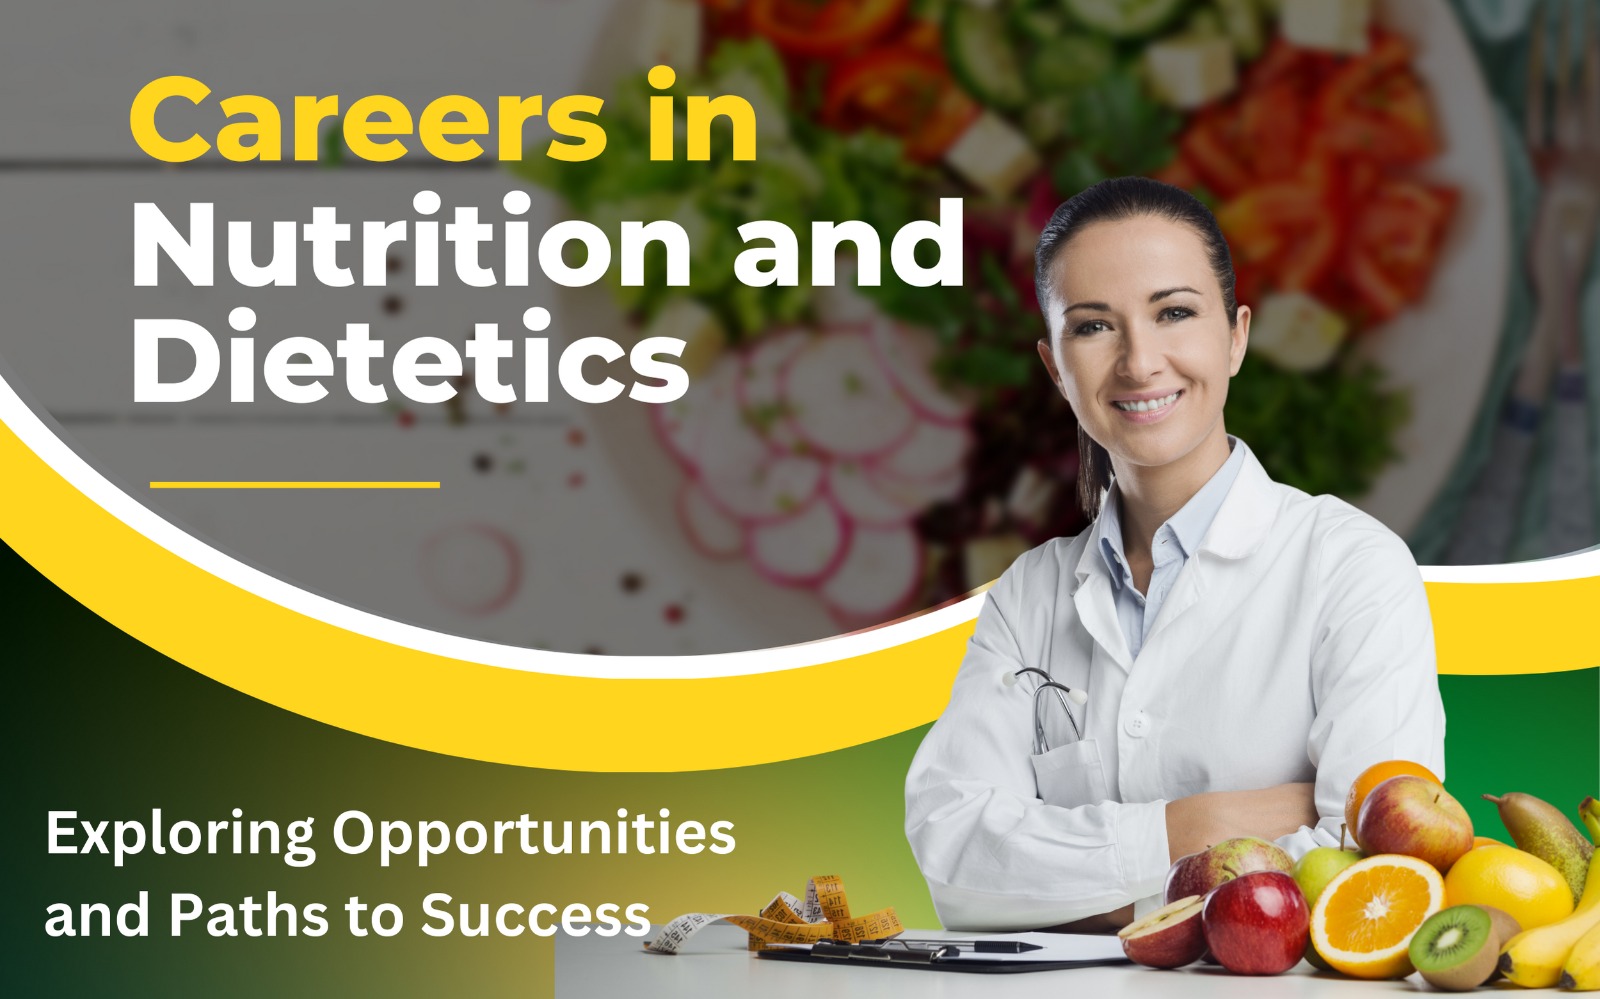 Careers in Nutrition and Dietetics Exploring Opportunities and Paths to Success.jpeg